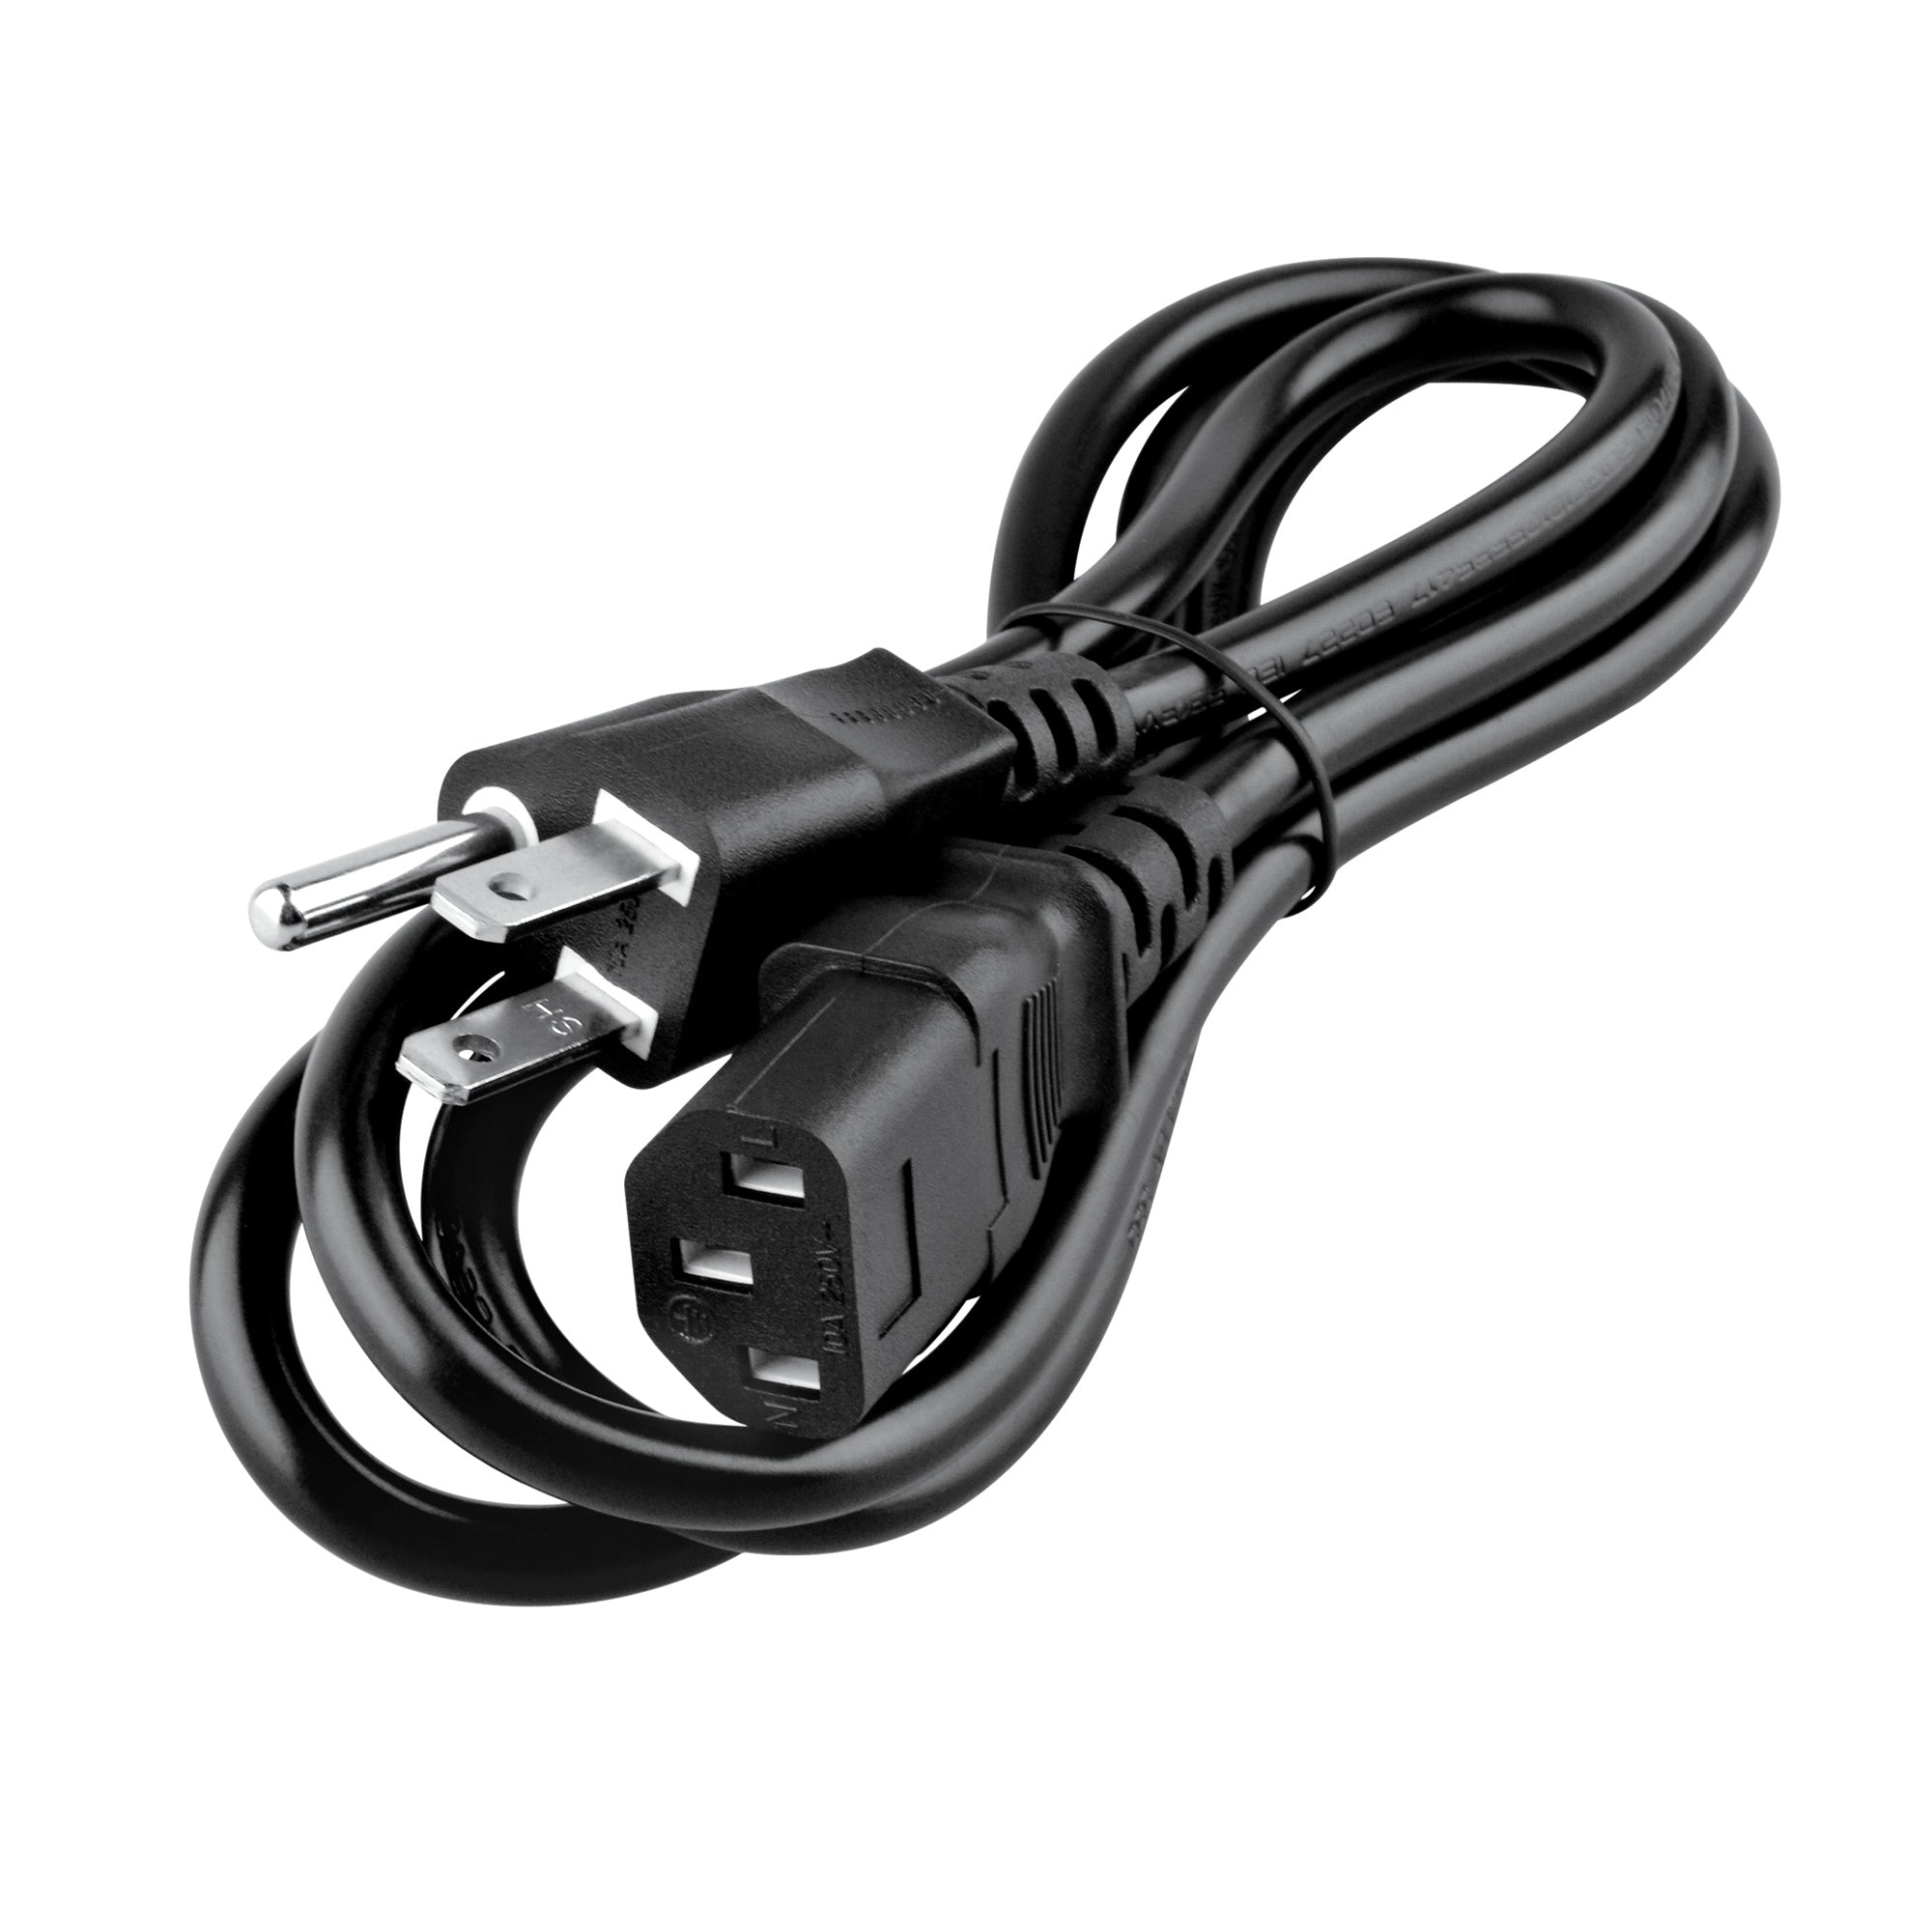 AbleGrid AC IN Power Cord Cable Lead Compatible with Samsung SyncMaster LS22B420 S22B420BW LS22B420BWN/ZA LS22B420BWV/GO 172N 953BW 204BW LS20HAWCB7/XAA B1940EW LS19CBDABV LS19CBDABV/ZA 2243BWT